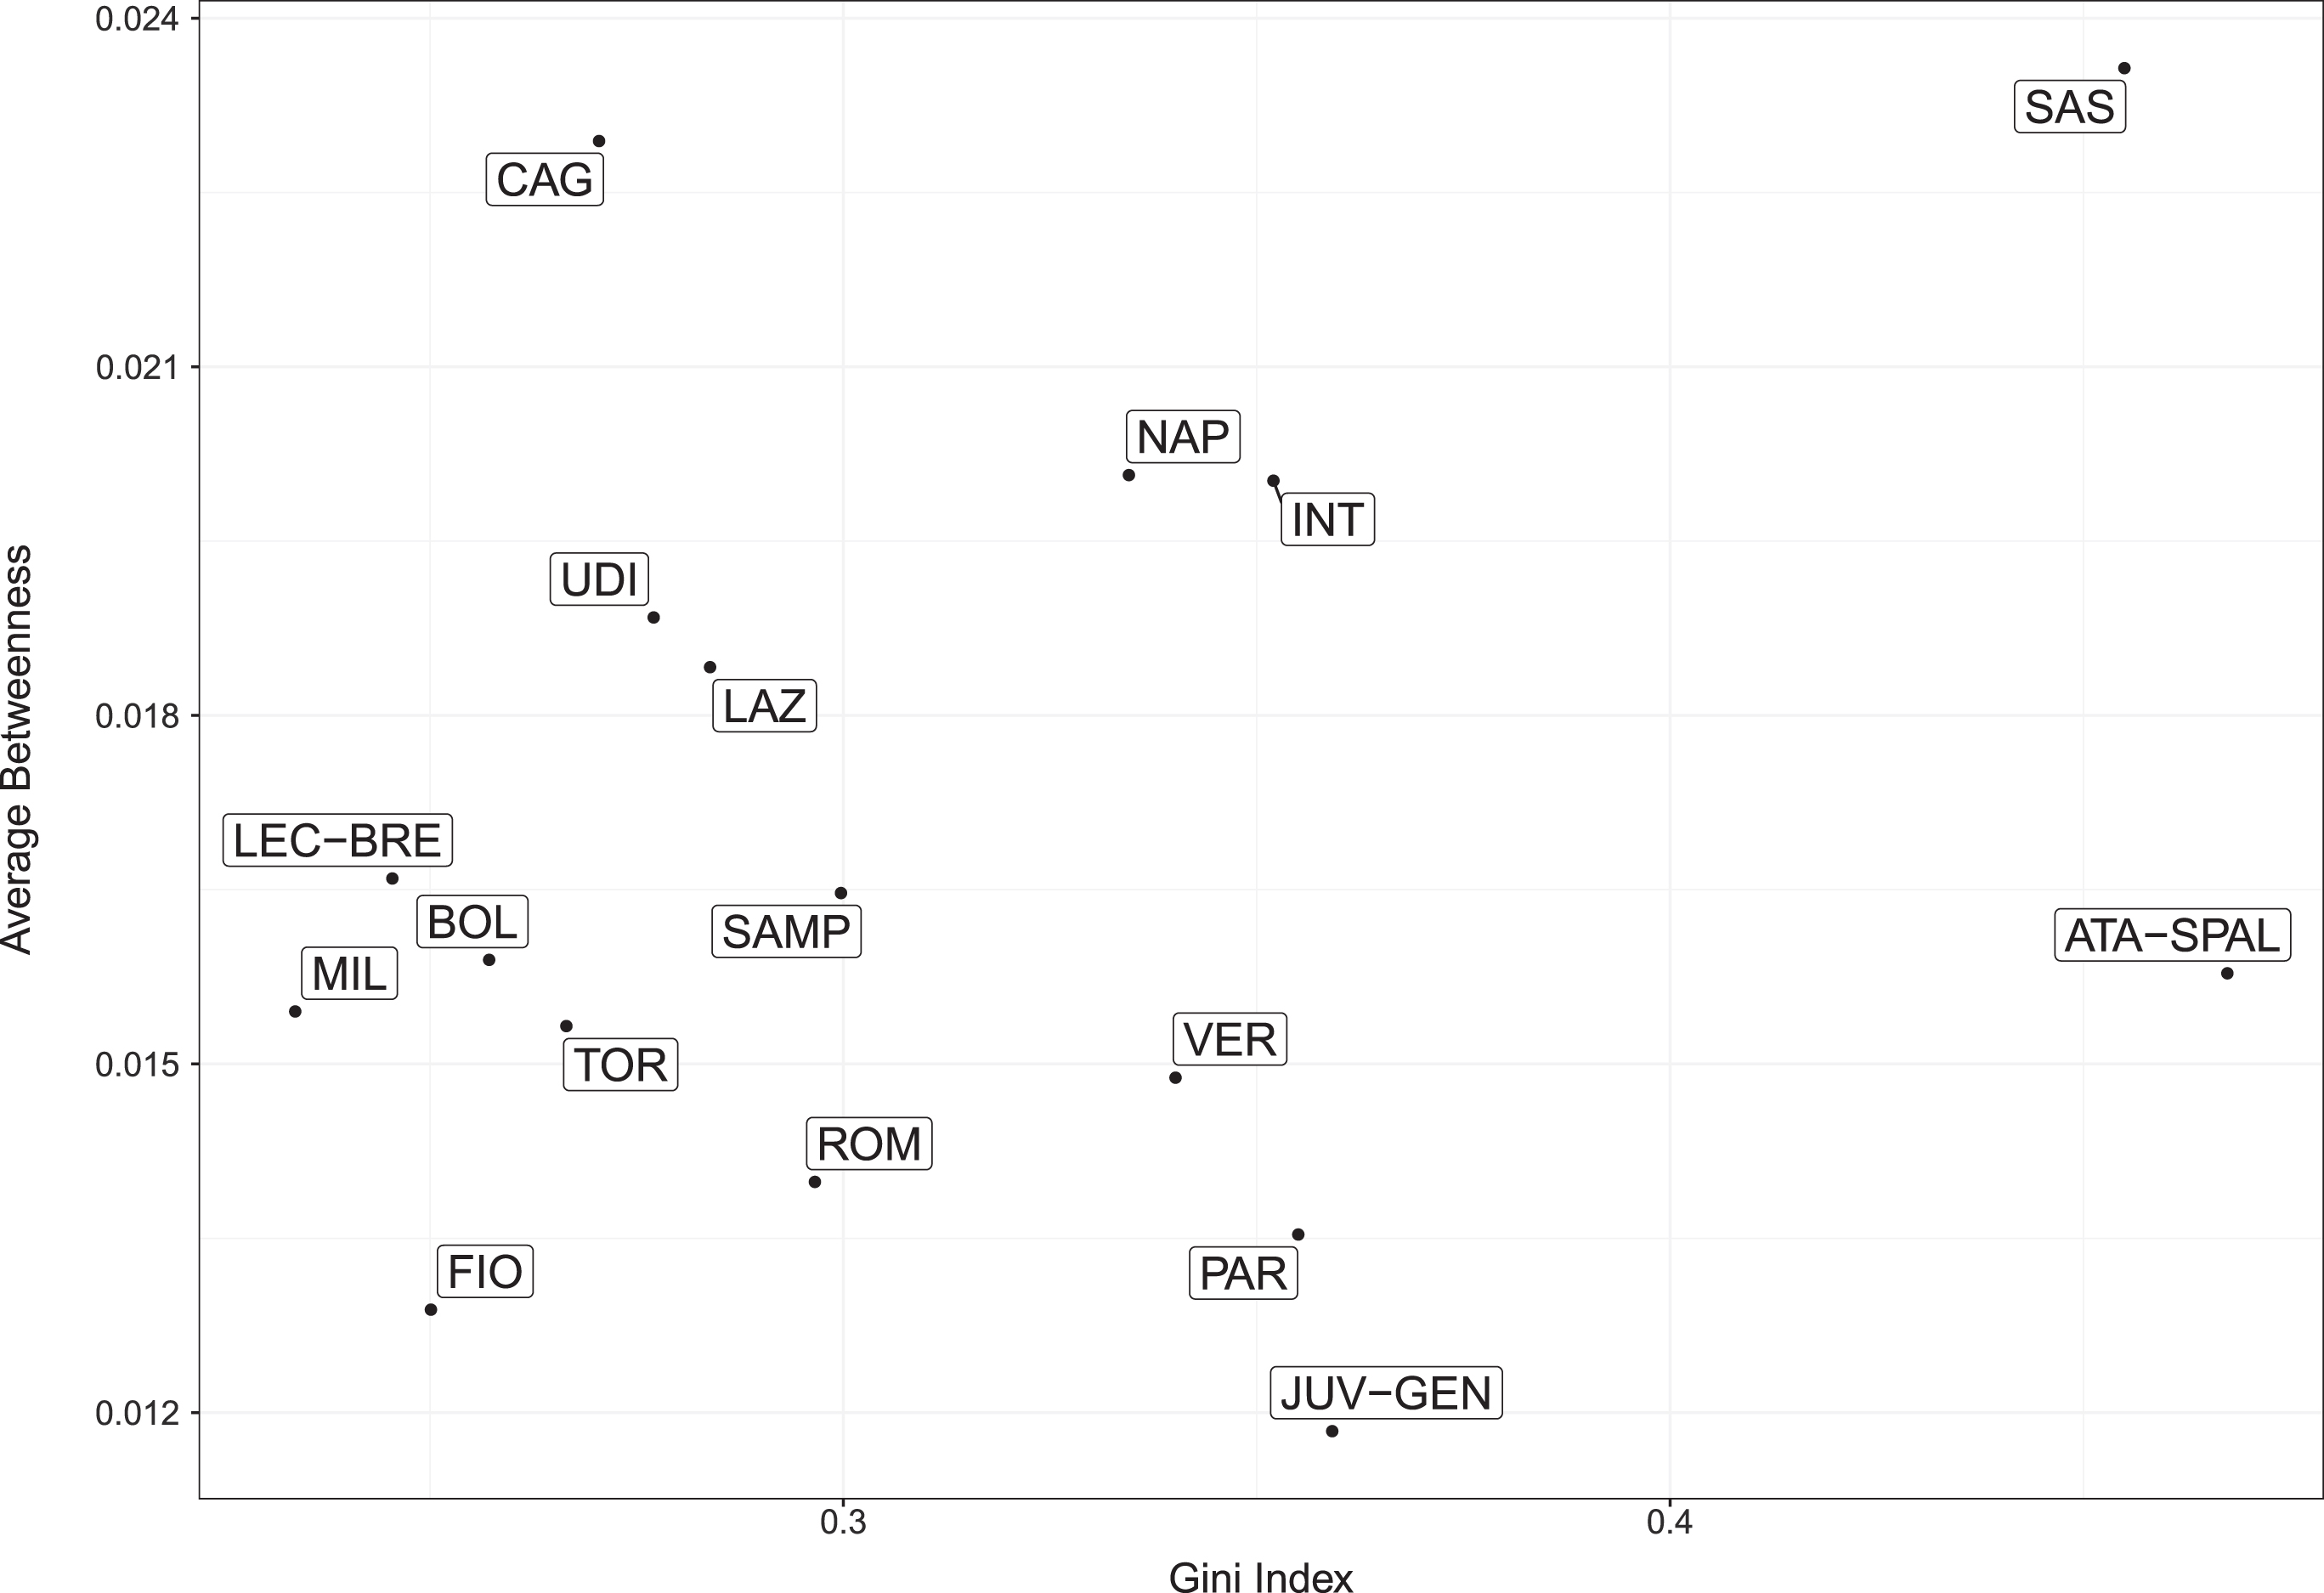 Scatter plot of Average Betweenness against Gini index for the 20 Serie A Teams, considering the agents involved in each Community.